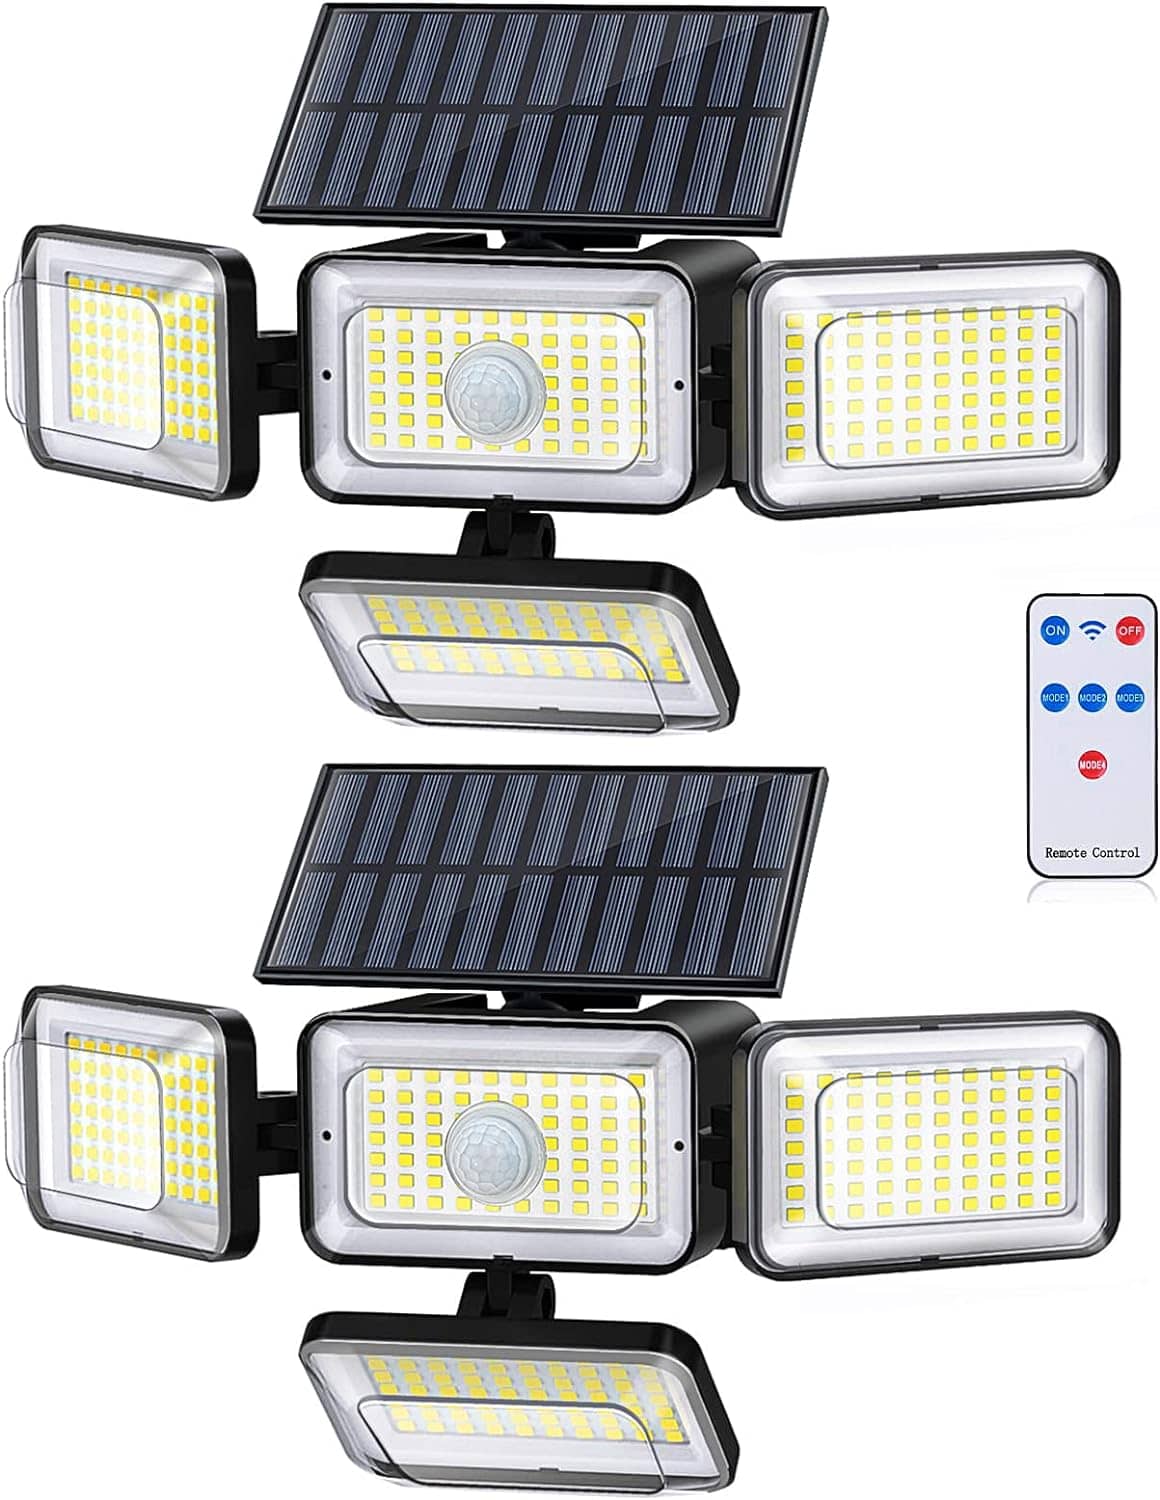 TWO PACK of 4-Panel Adjustable Remote Motion Activated Motion Sensor Solar Waterproof Outdoor Lights $29.99 (reg $60)